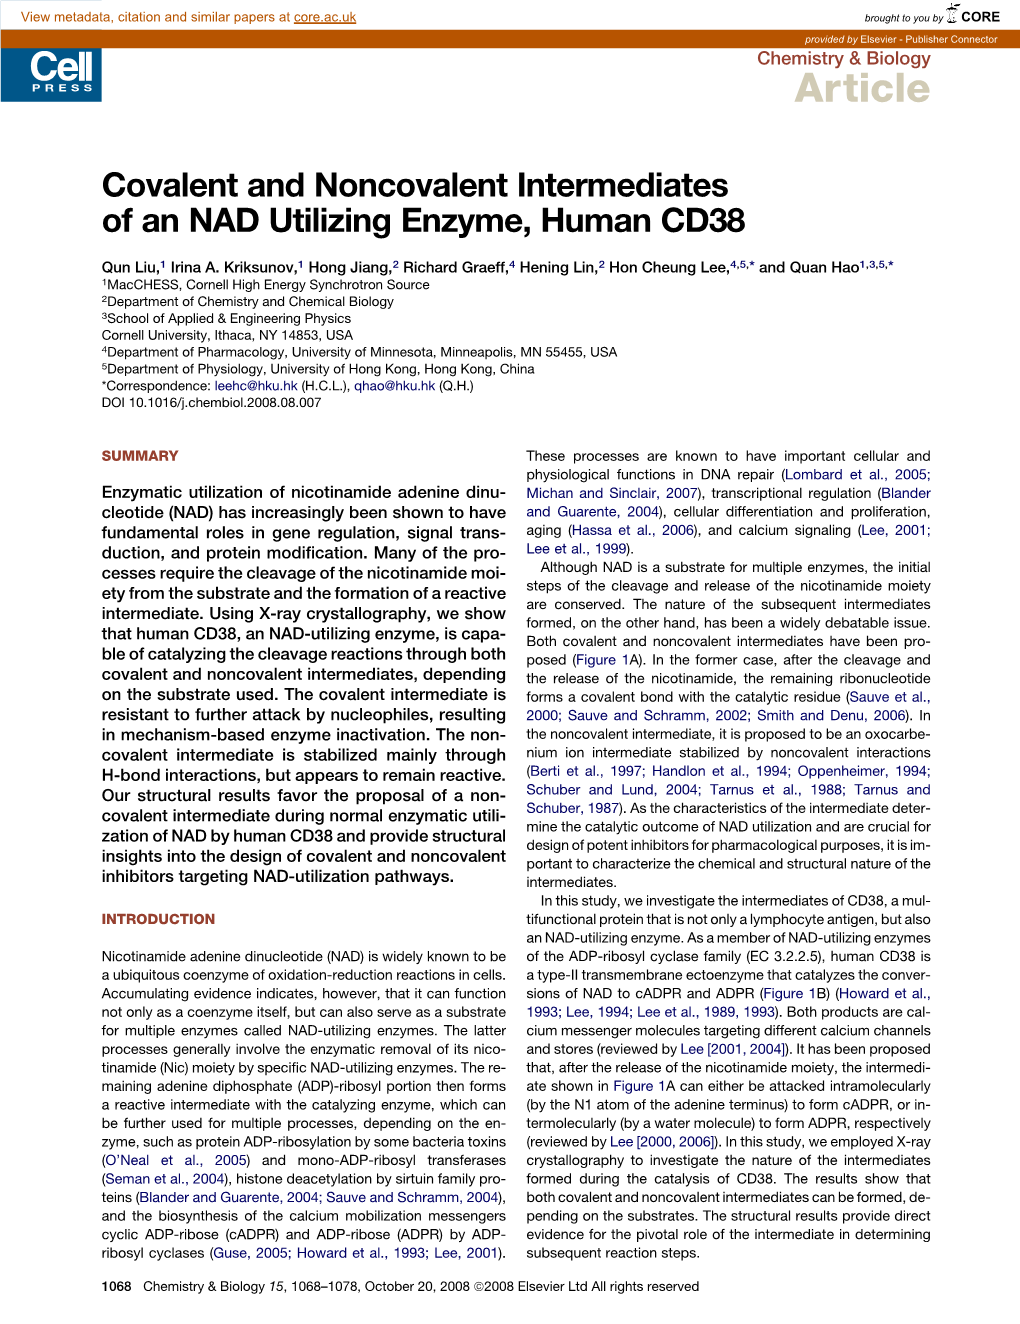 Covalent and Noncovalent Intermediates of an NAD Utilizing Enzyme, Human CD38